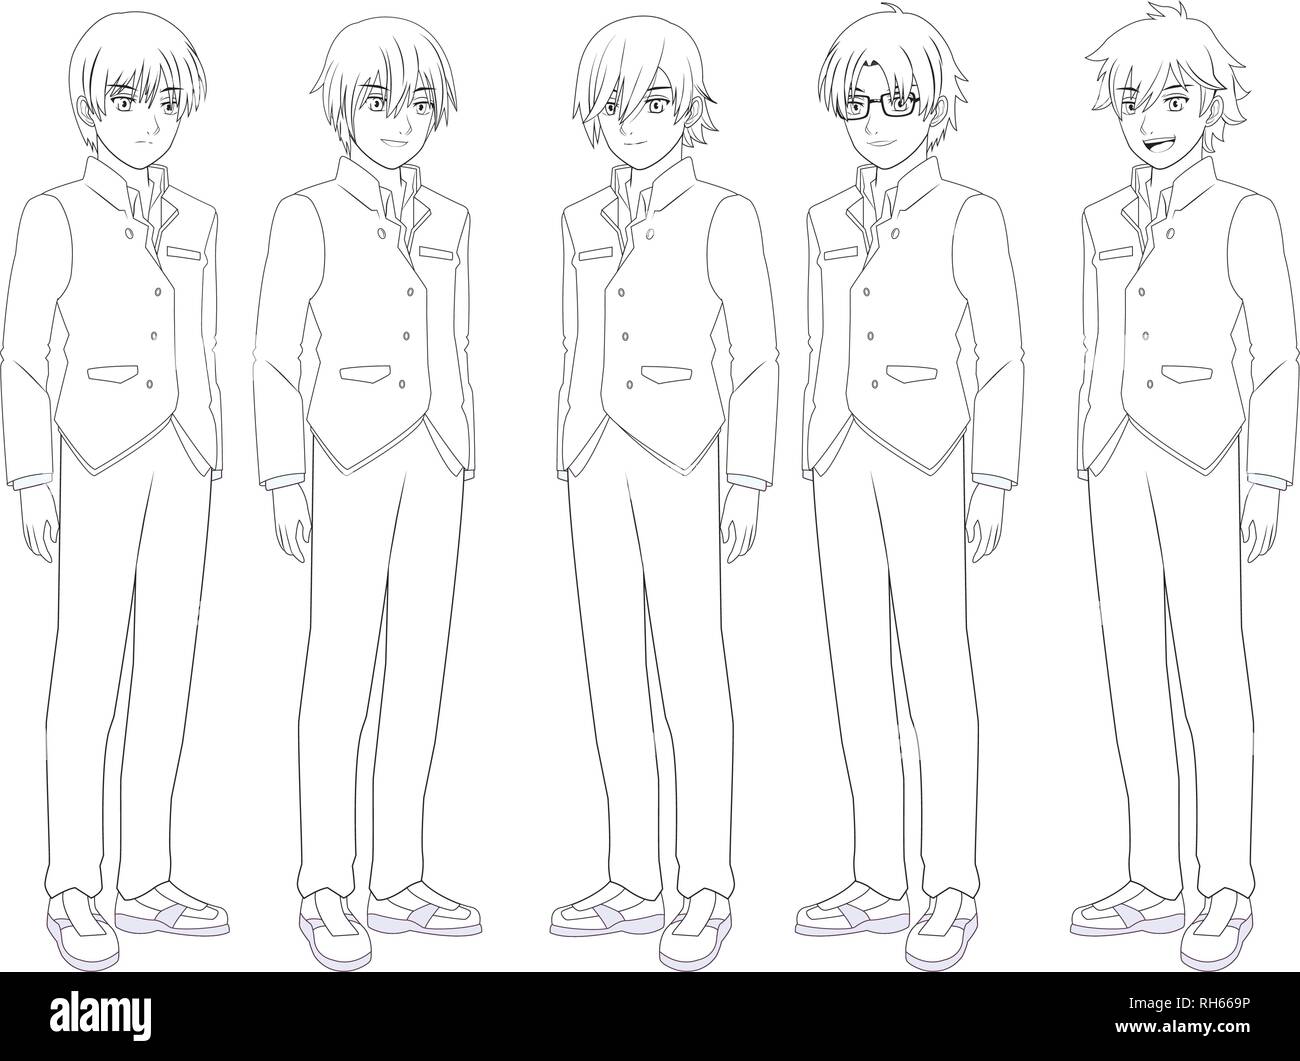 How to Draw a Manga Girl in School Uniform Side View  StepbyStep  Pictures  How 2 Draw Manga